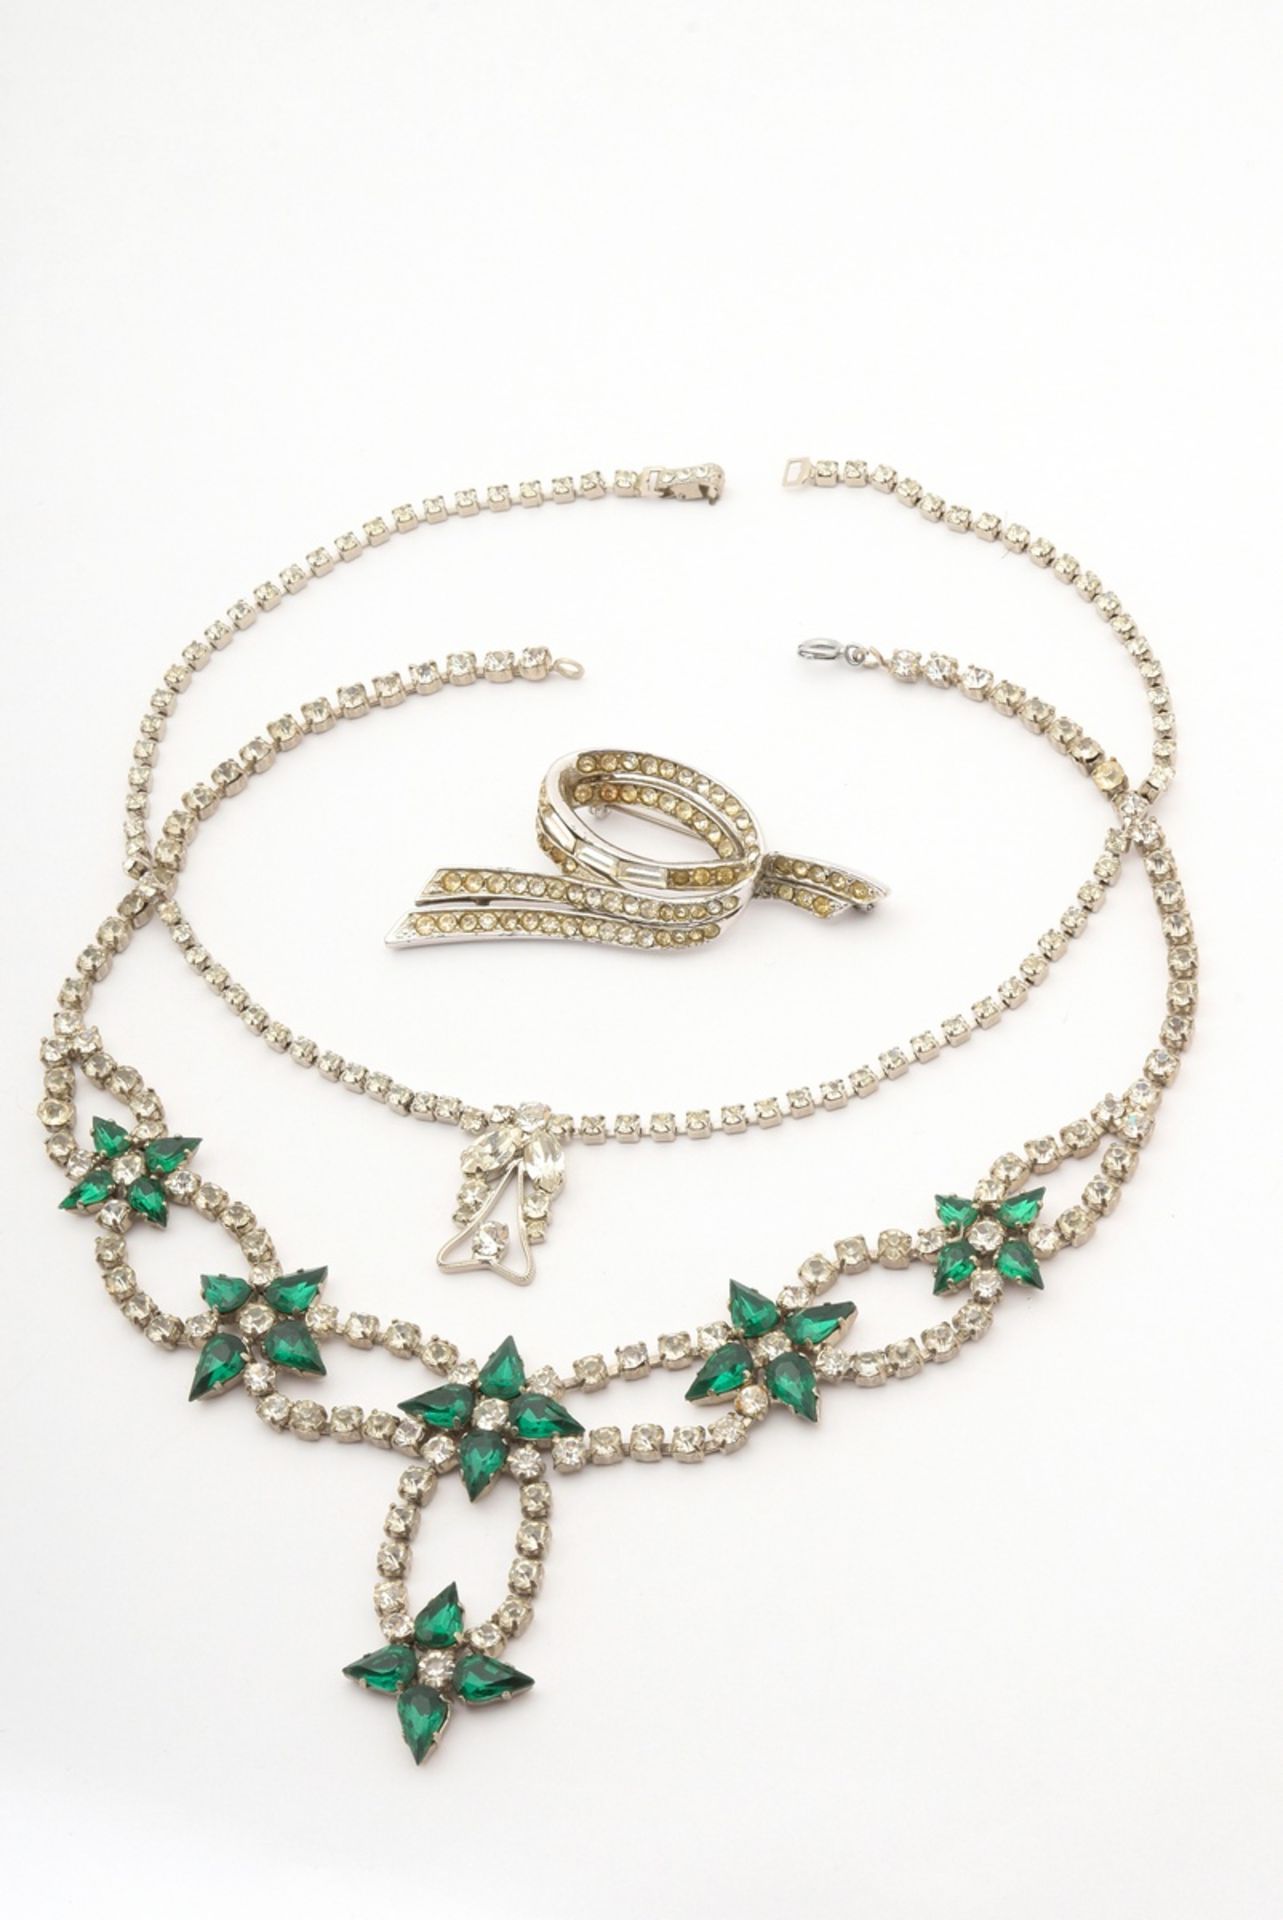 3 pieces vintage costume jewellery in white metal with green and white rhinestones: 1x star necklac - Image 2 of 9